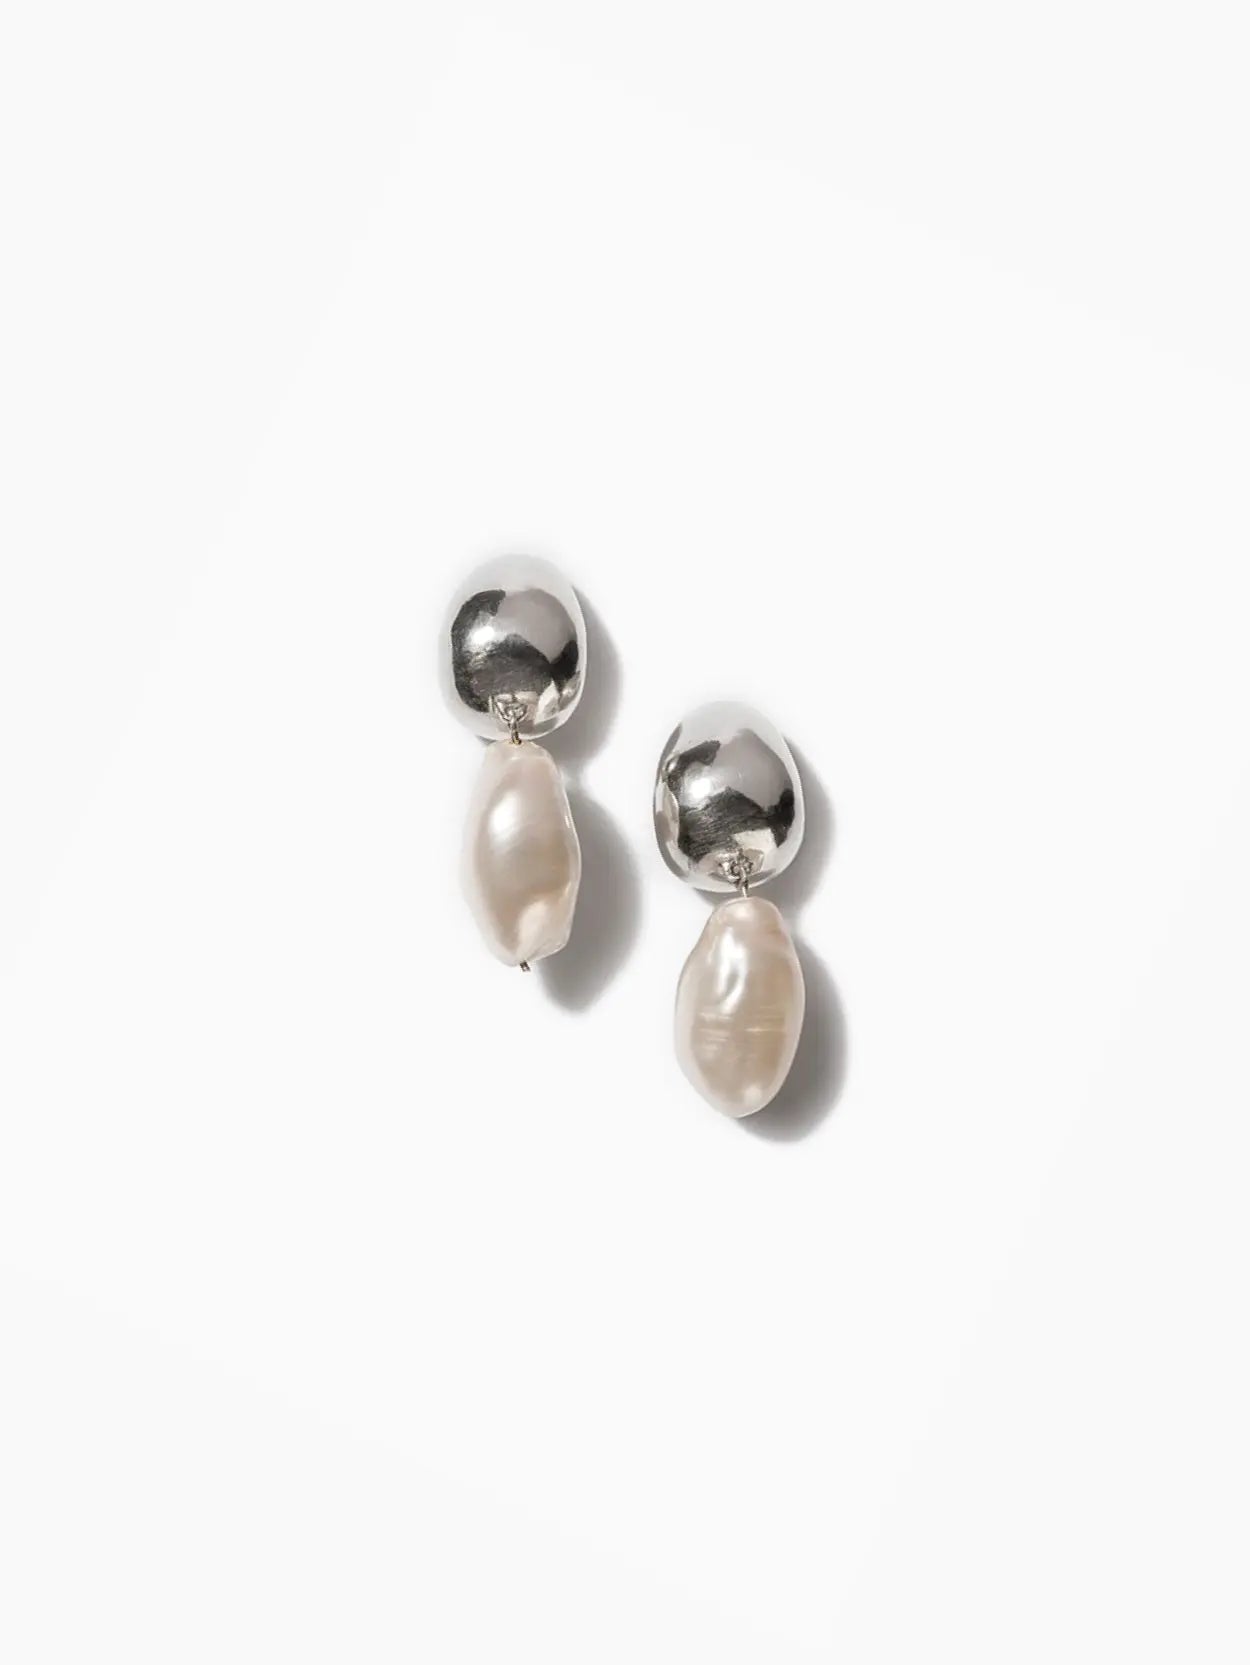 A pair of elegant Ava Earrings with small, silver spherical studs and irregular, baroque freshwater pearls dangling from each, available exclusively at Nathalie Schreckenberg Bassalstore, set against a plain white background.